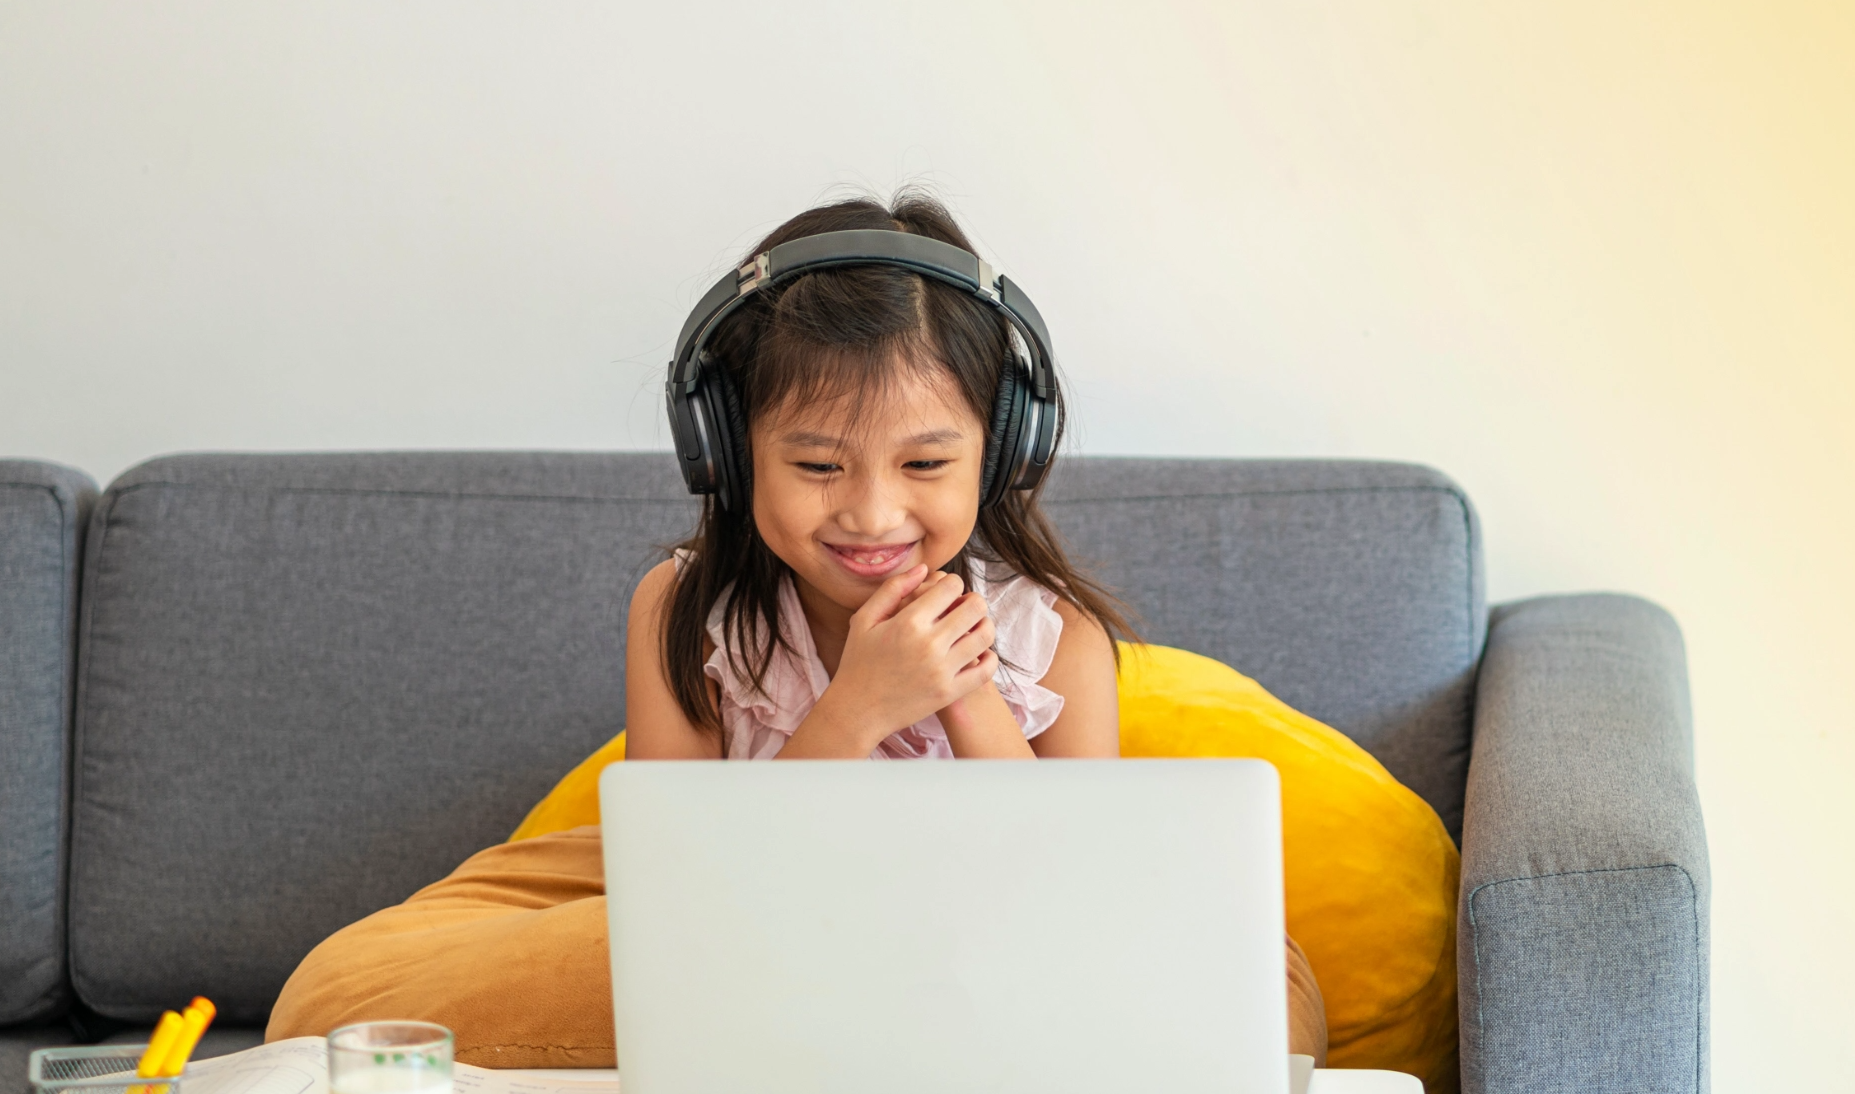 Young girl wearing headphones and using library online services smiles at a laptop screen.